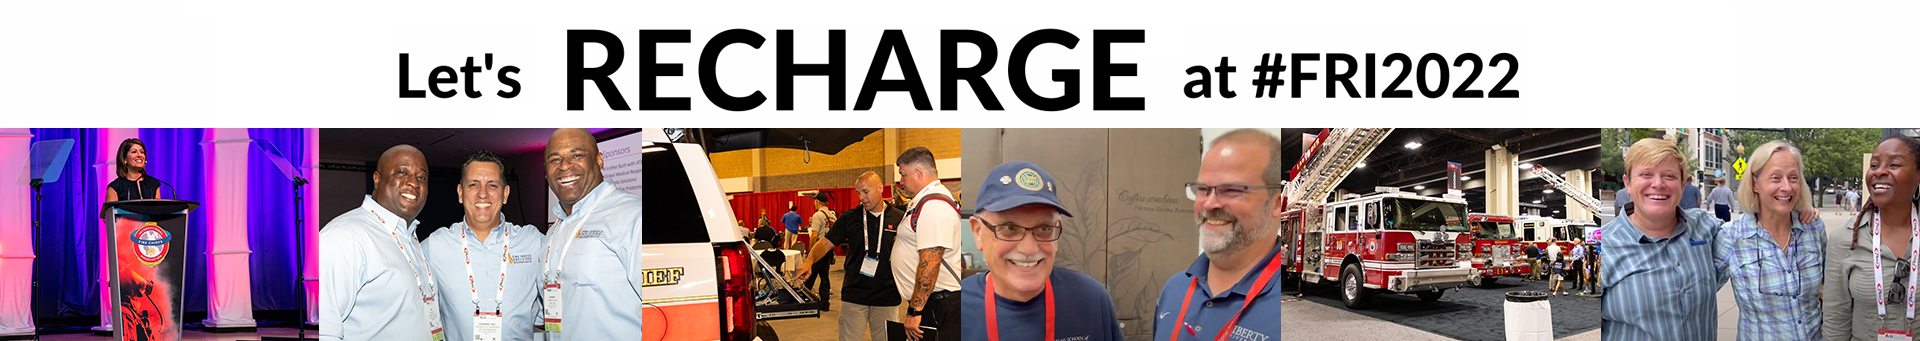 Let's RECHARGE at #FRI2022, banner featuring pictures of previous conference attendees.